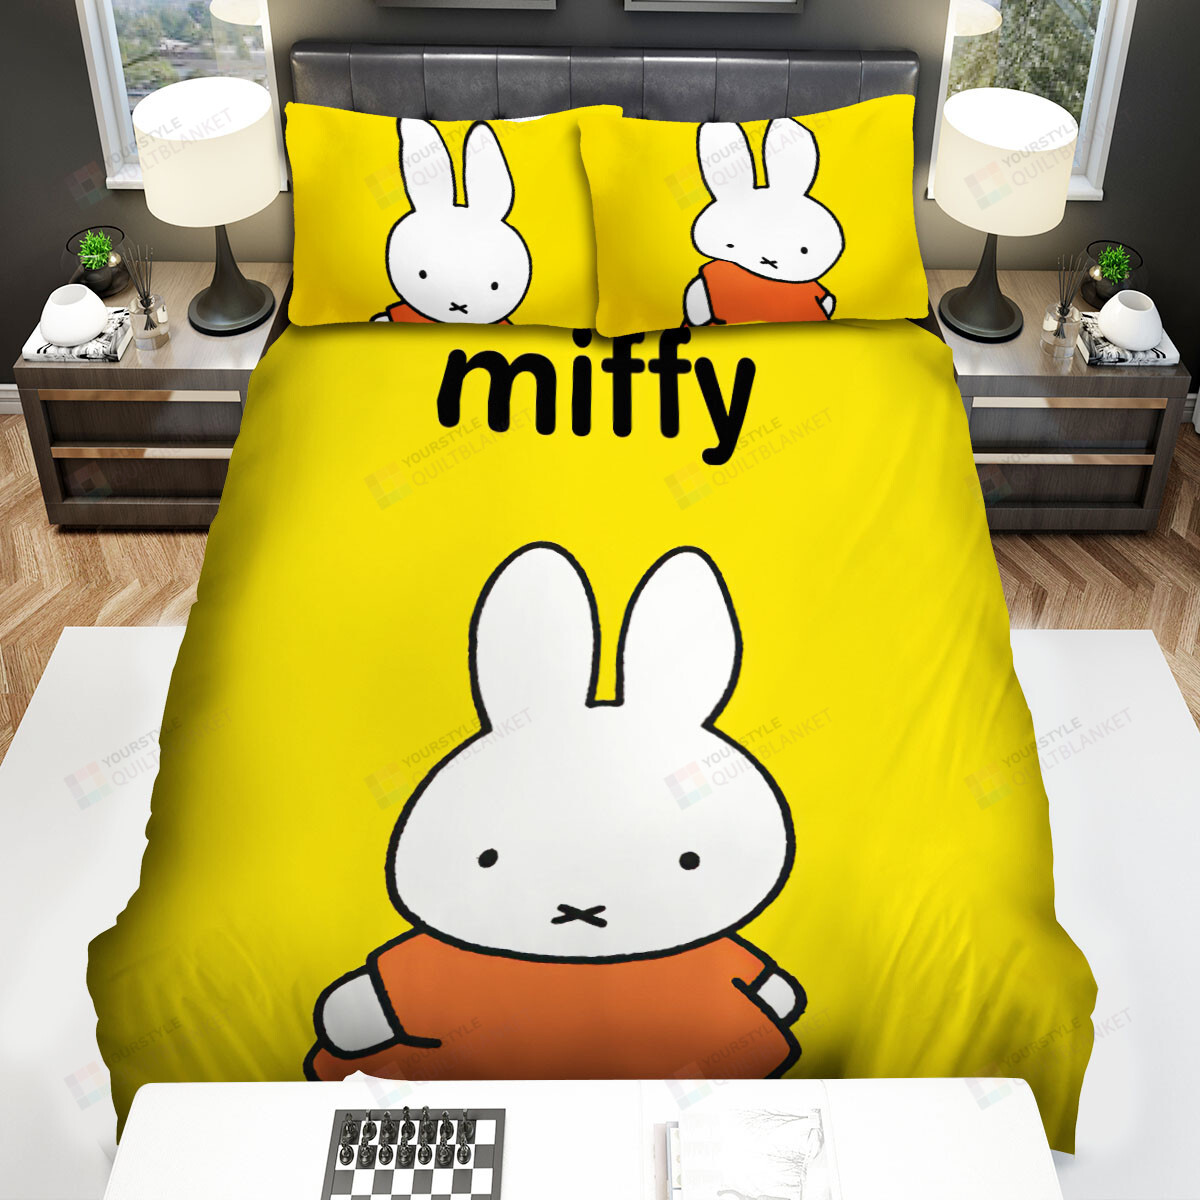 Miffy's Adventures Big And Small Miffy Solo Image Bed Sheets Spread Duvet Cover Bedding Sets